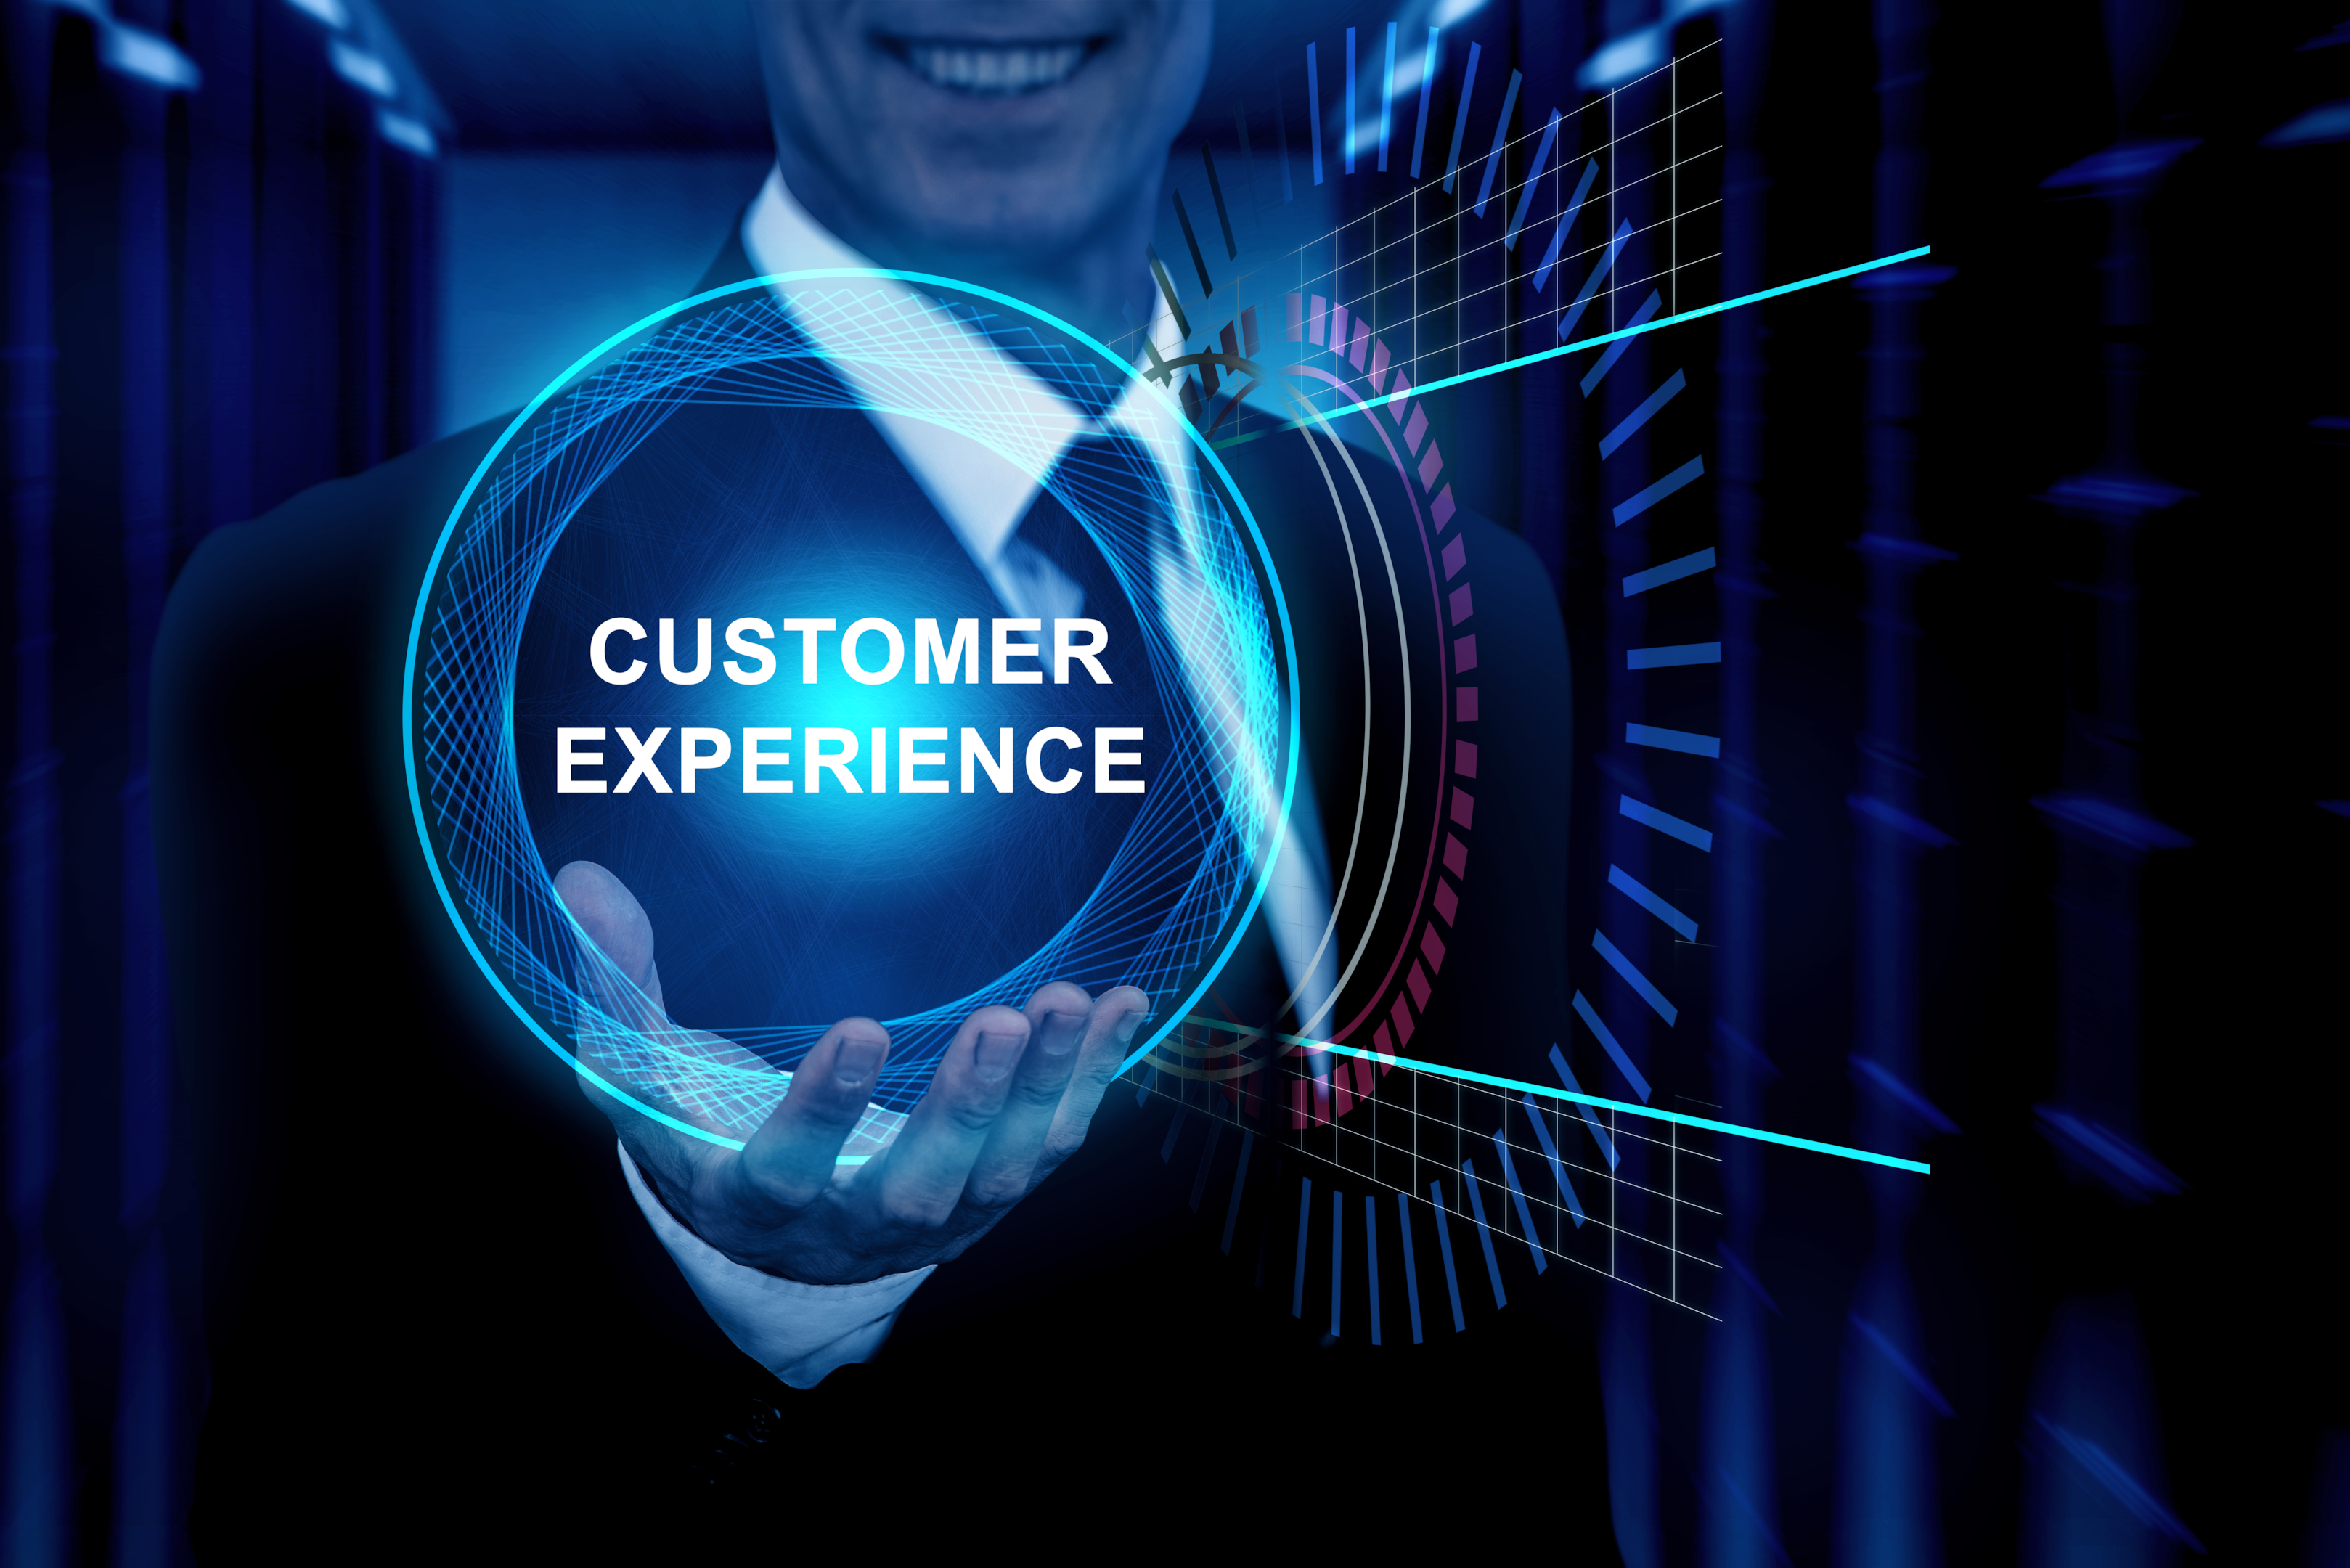 Branding experience is directly related to boosting customer experience